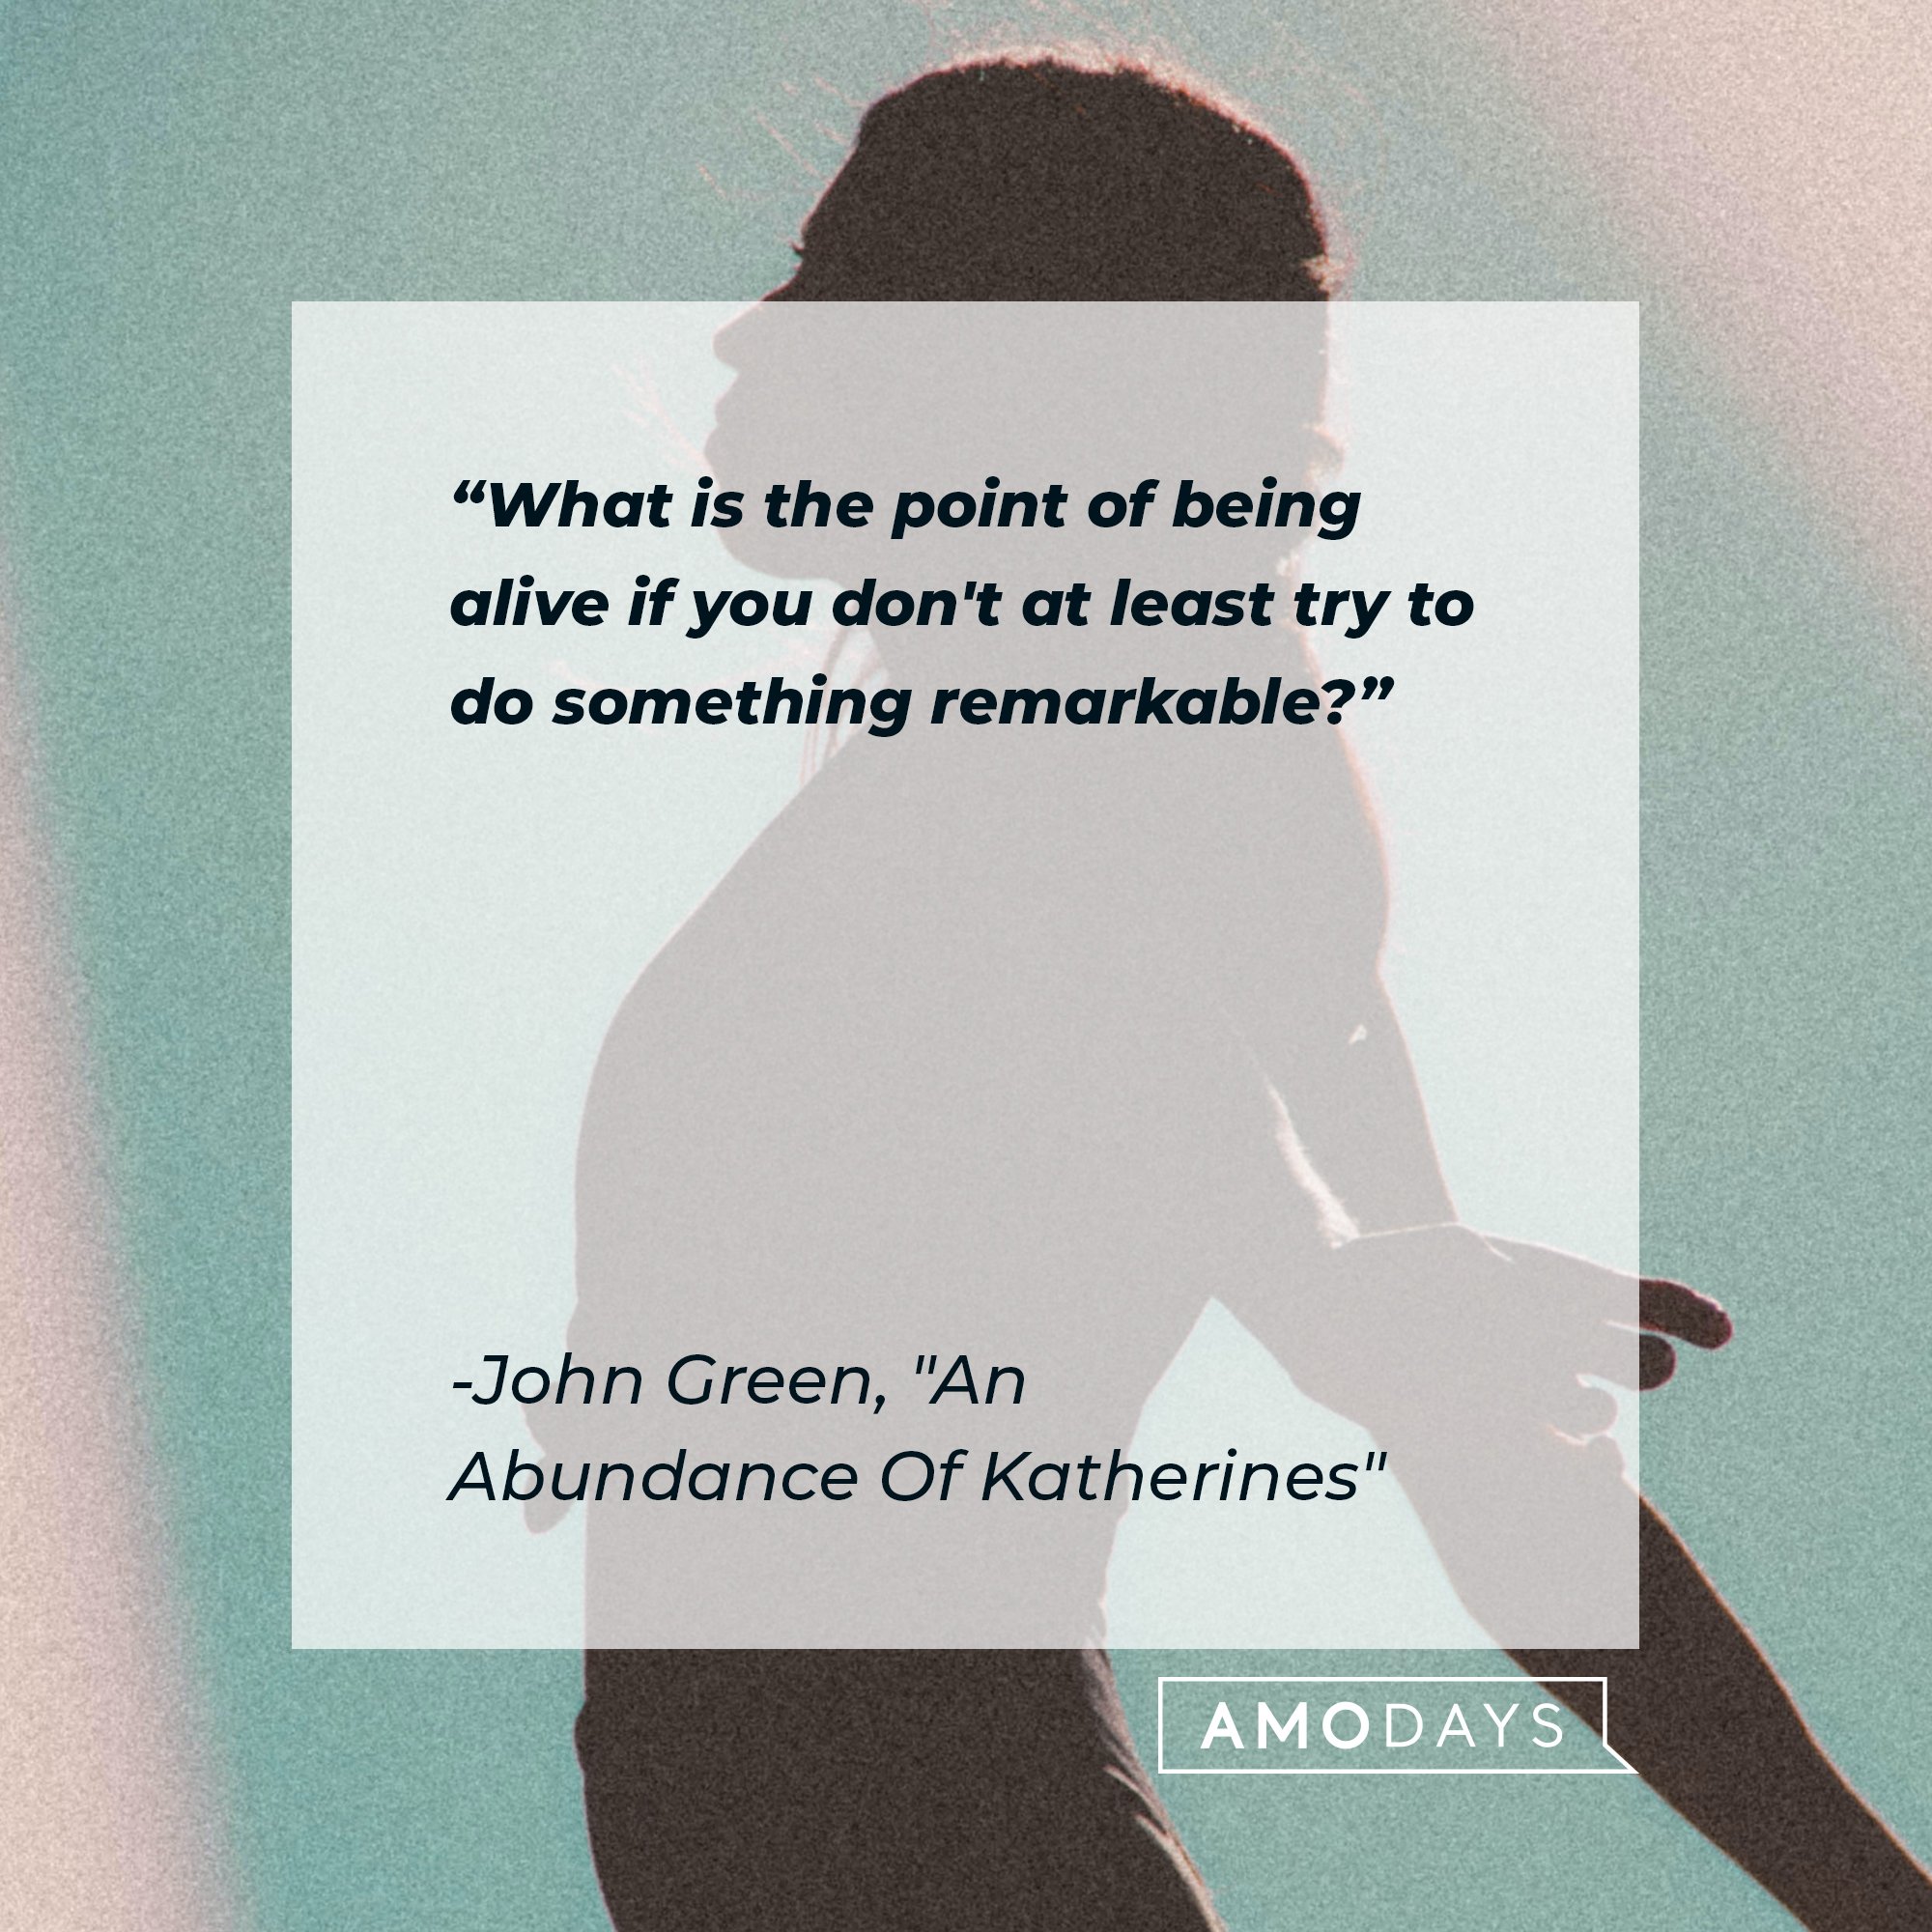 John Green’s quote from “An Abundance Of Katherines": "What is the point of being alive if you don't at least try to do something remarkable?" | Image: AmoDays